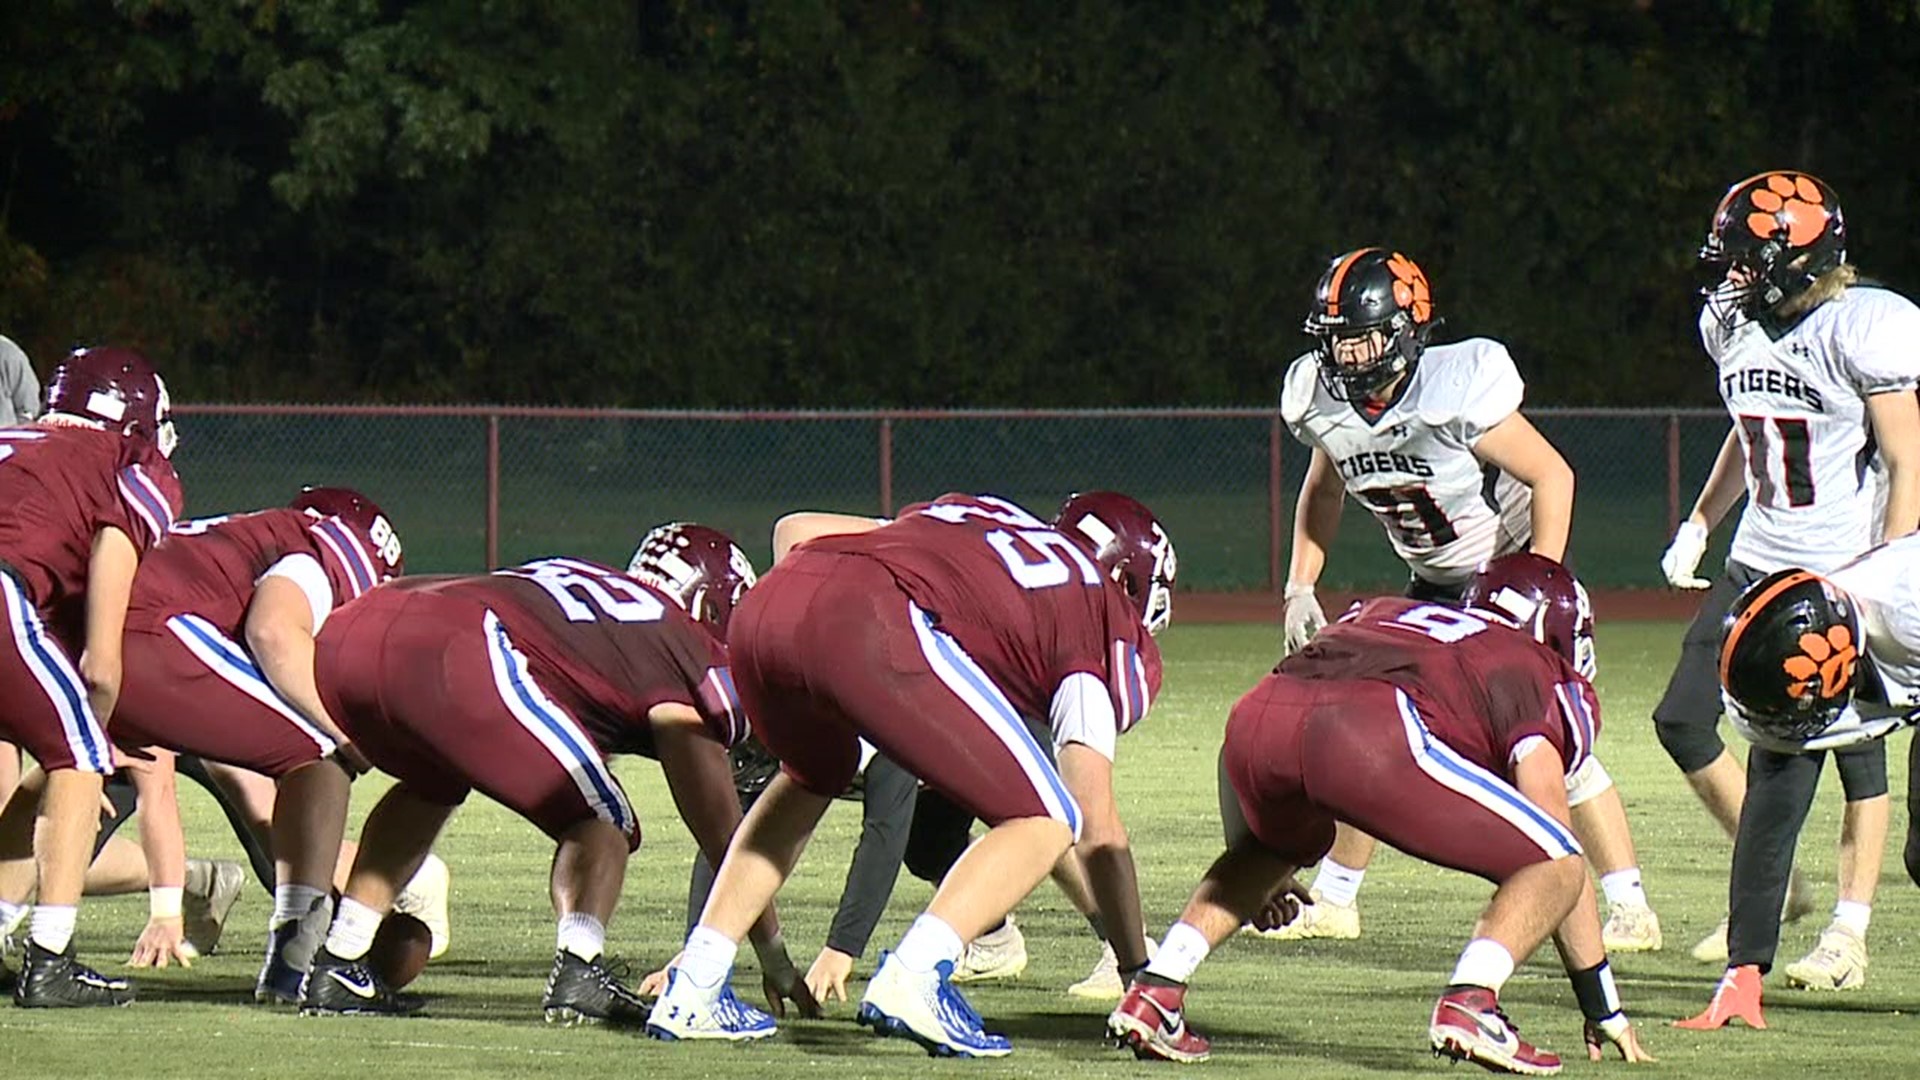 Dunmore and Tunkhannock originally had different opponents but ended up playing each other.